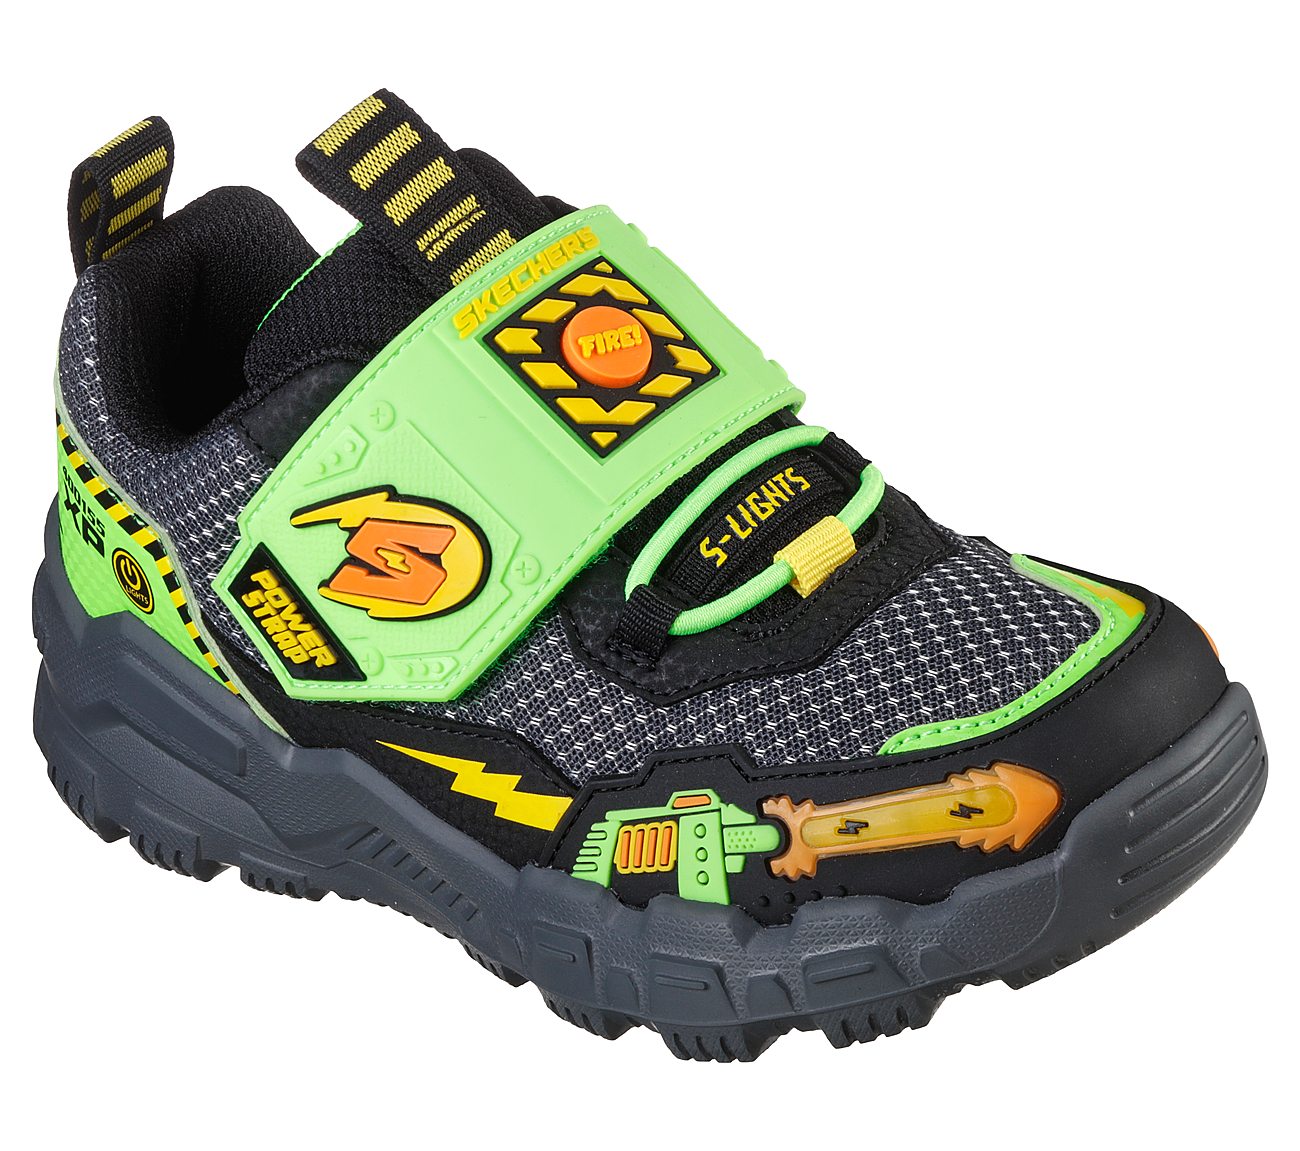 ADVENTURE TRACK-SOUND BLASTER, BLACK/LIME Footwear Lateral View